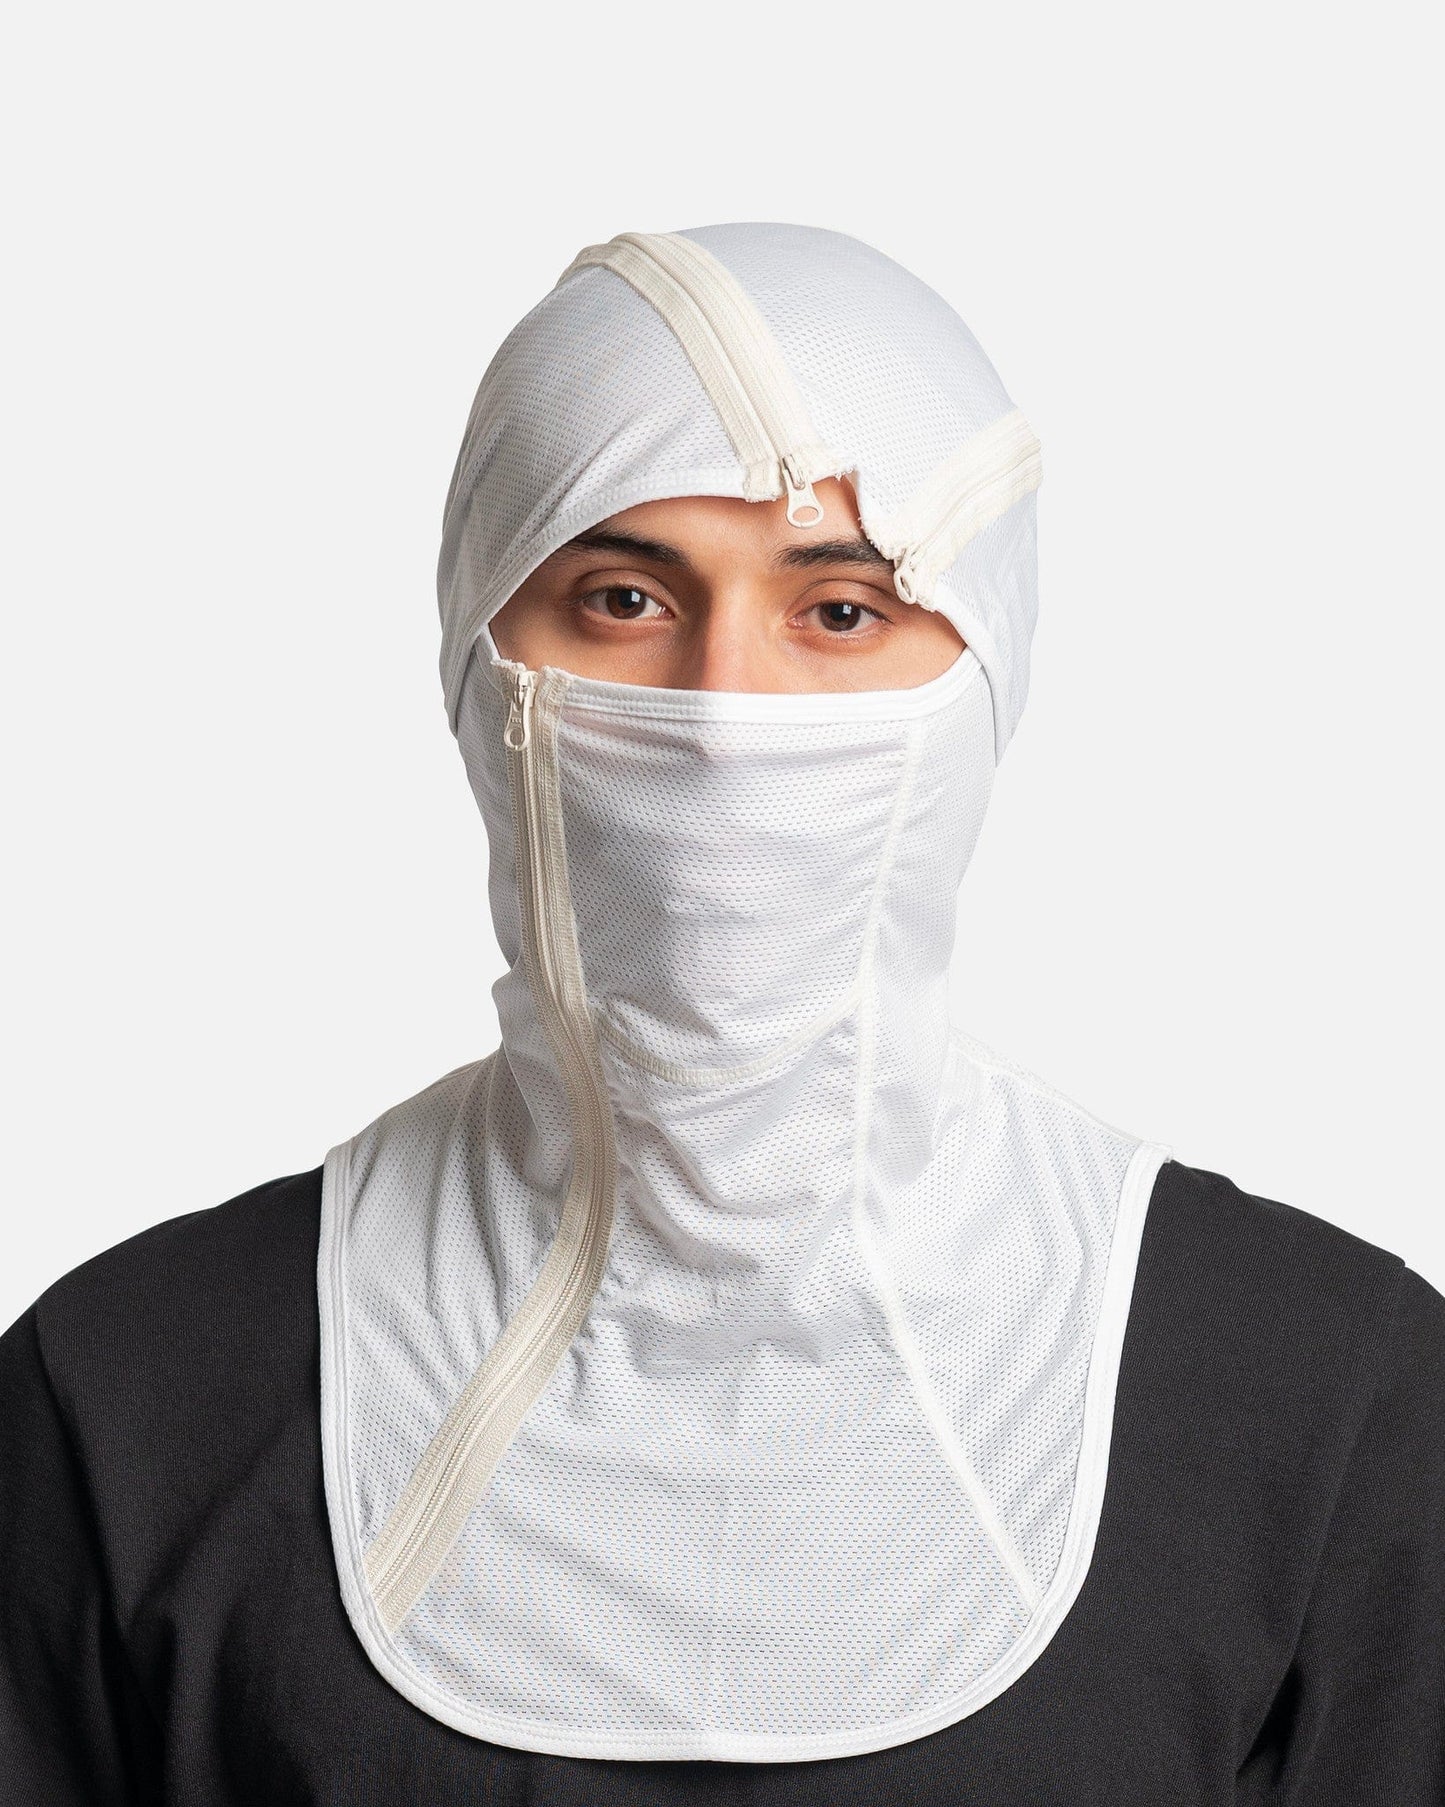 POST ARCHIVE FACTION (P.A.F) Men's Hats 5.0 Balaclava Center in Ivory